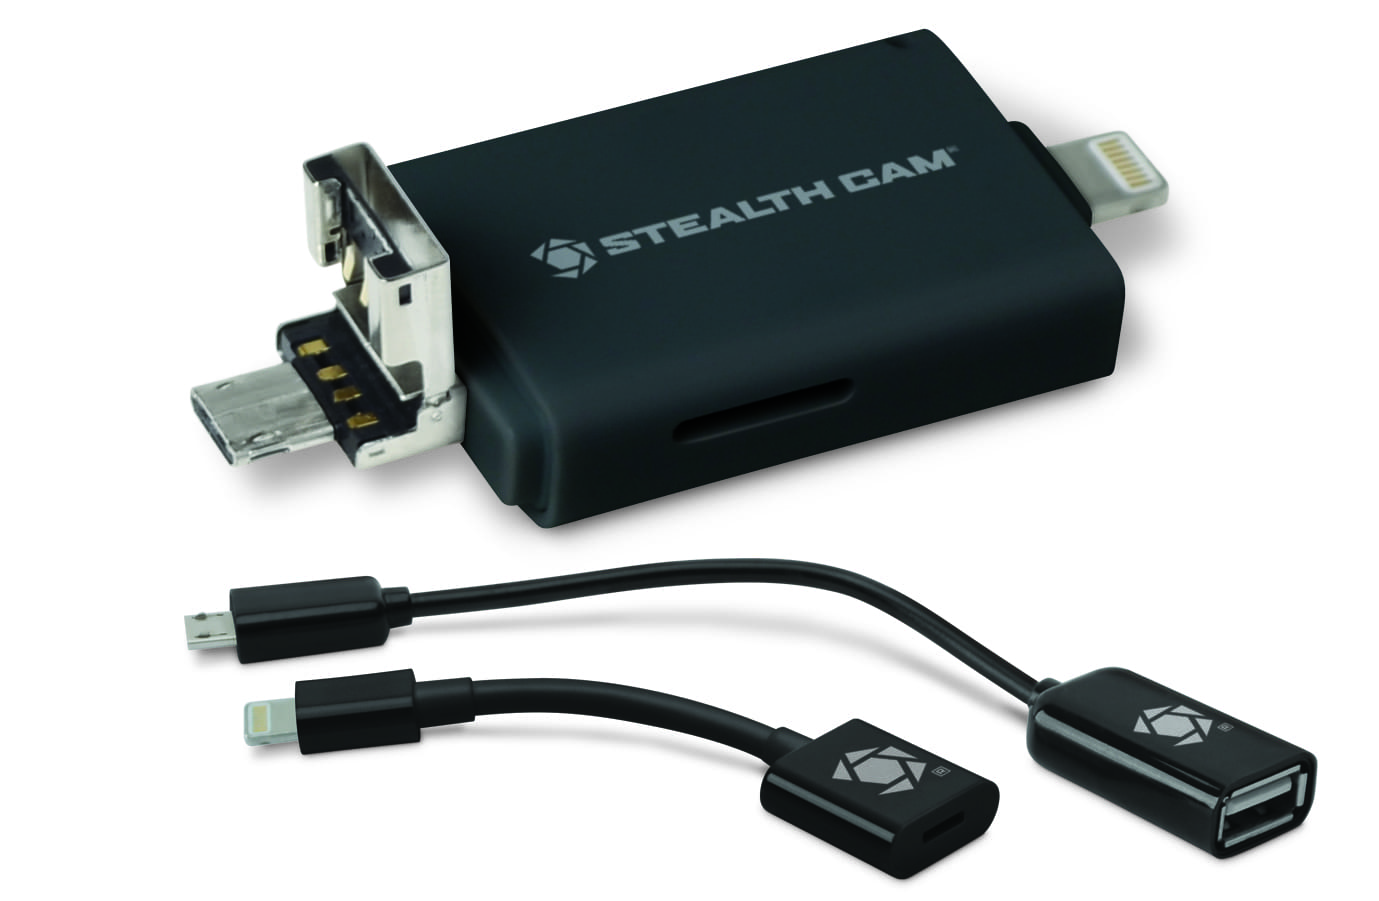 Stealth Cam unveils a Dual Card reader for IOS and Android